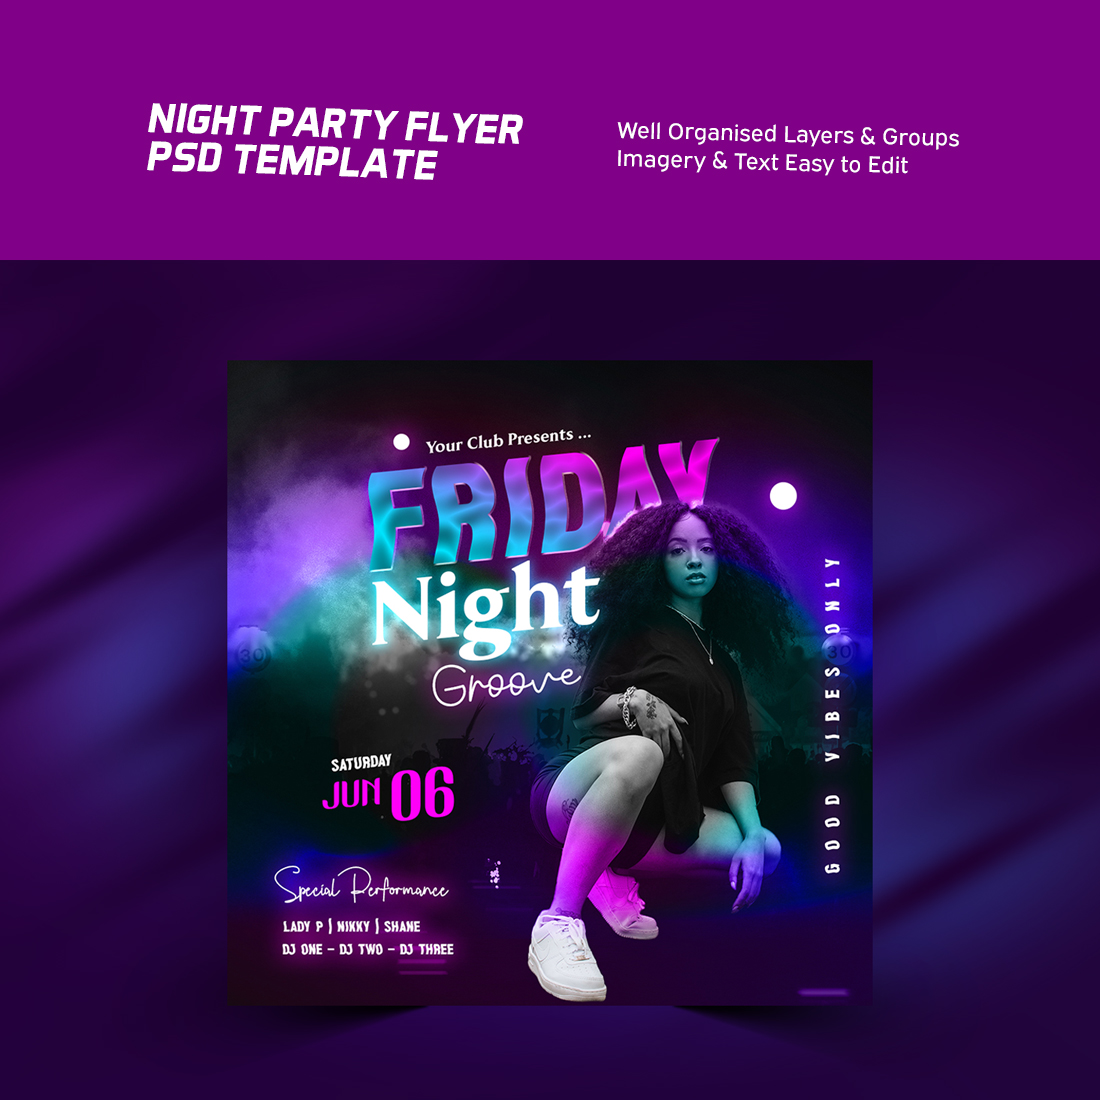 Night Party Flyer - Event Flyer PSD Template preview image.